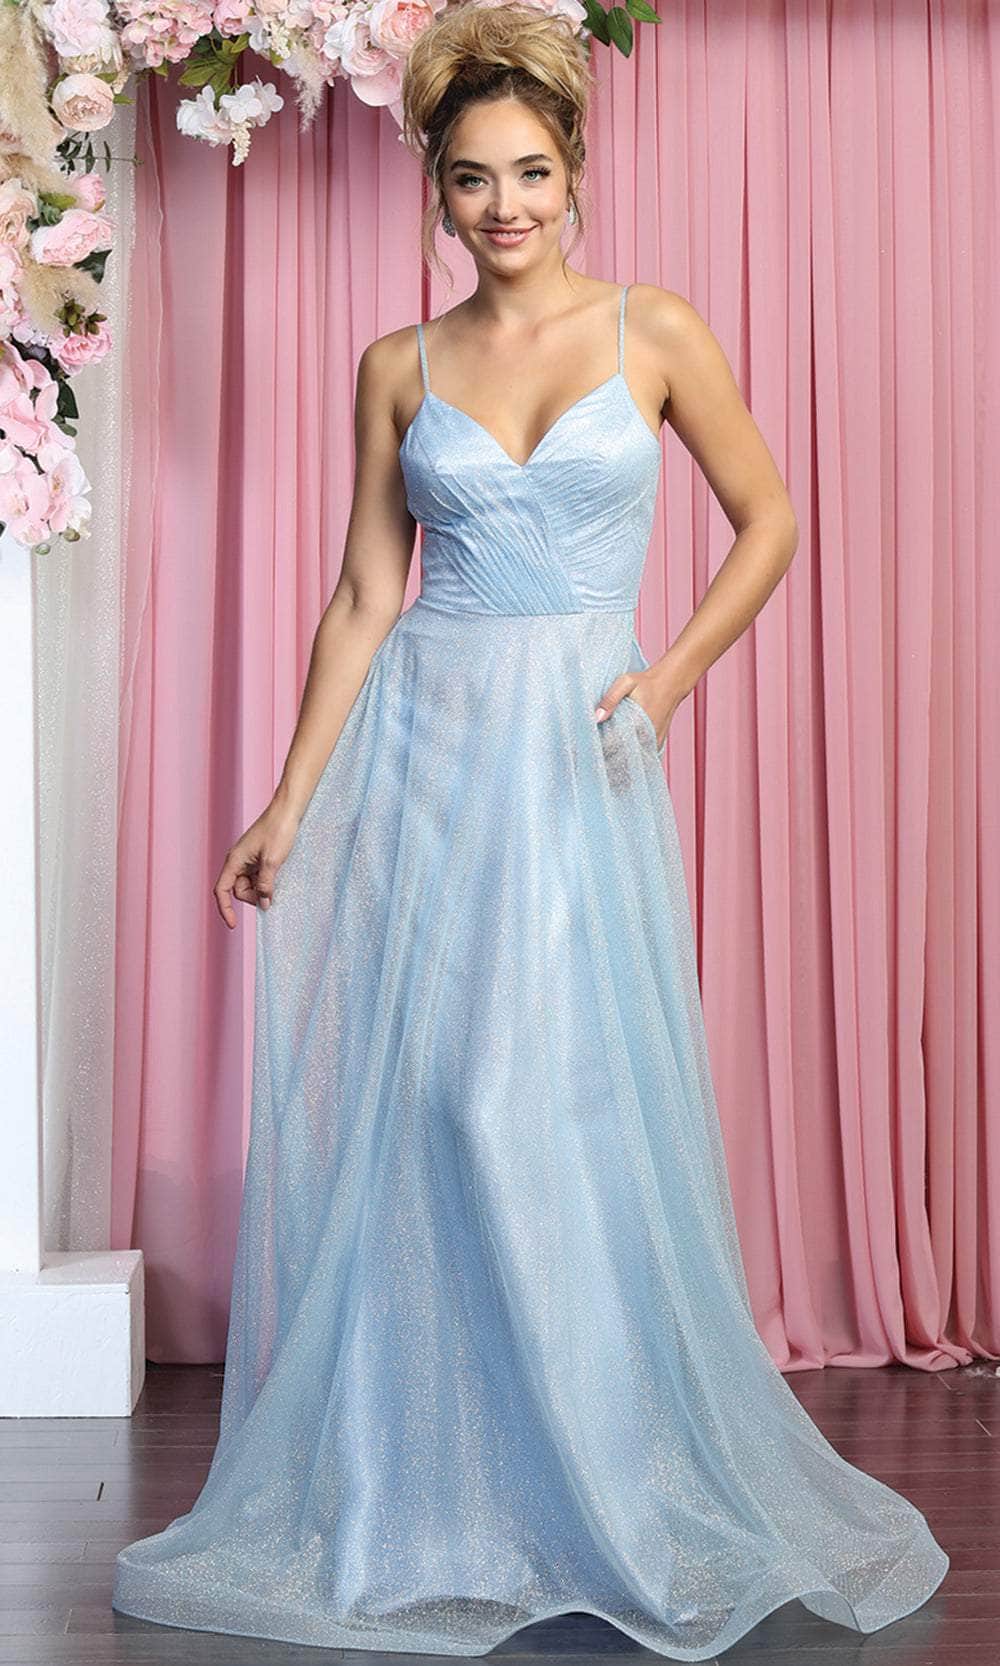 May Queen MQ1838 - Sleeveless Glittered Tulle Surplice Evening Gown Special Occasion Dress 4 / Sky-Blue